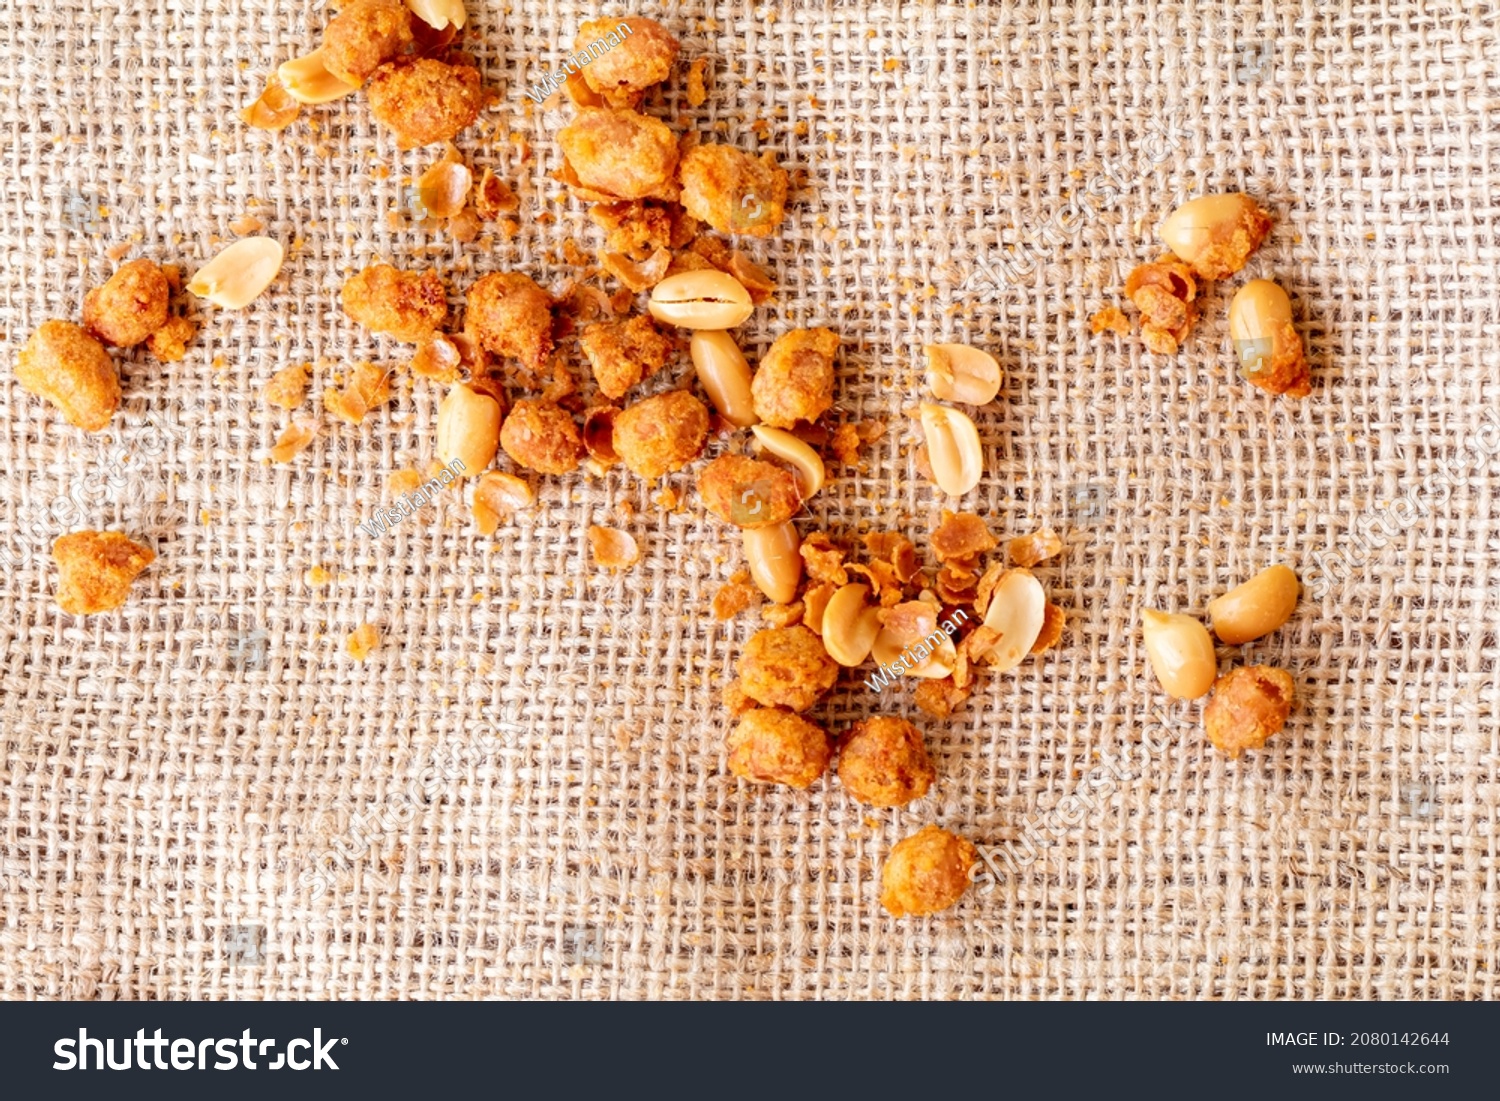 peanuts wrapped in flour, eggs and spices, which are fried, have a textured shape, with a crunchy, crunchy and savory taste.
usually called "egg nuts, Kacang telur" or "spice beans-kacang rempah" #2080142644